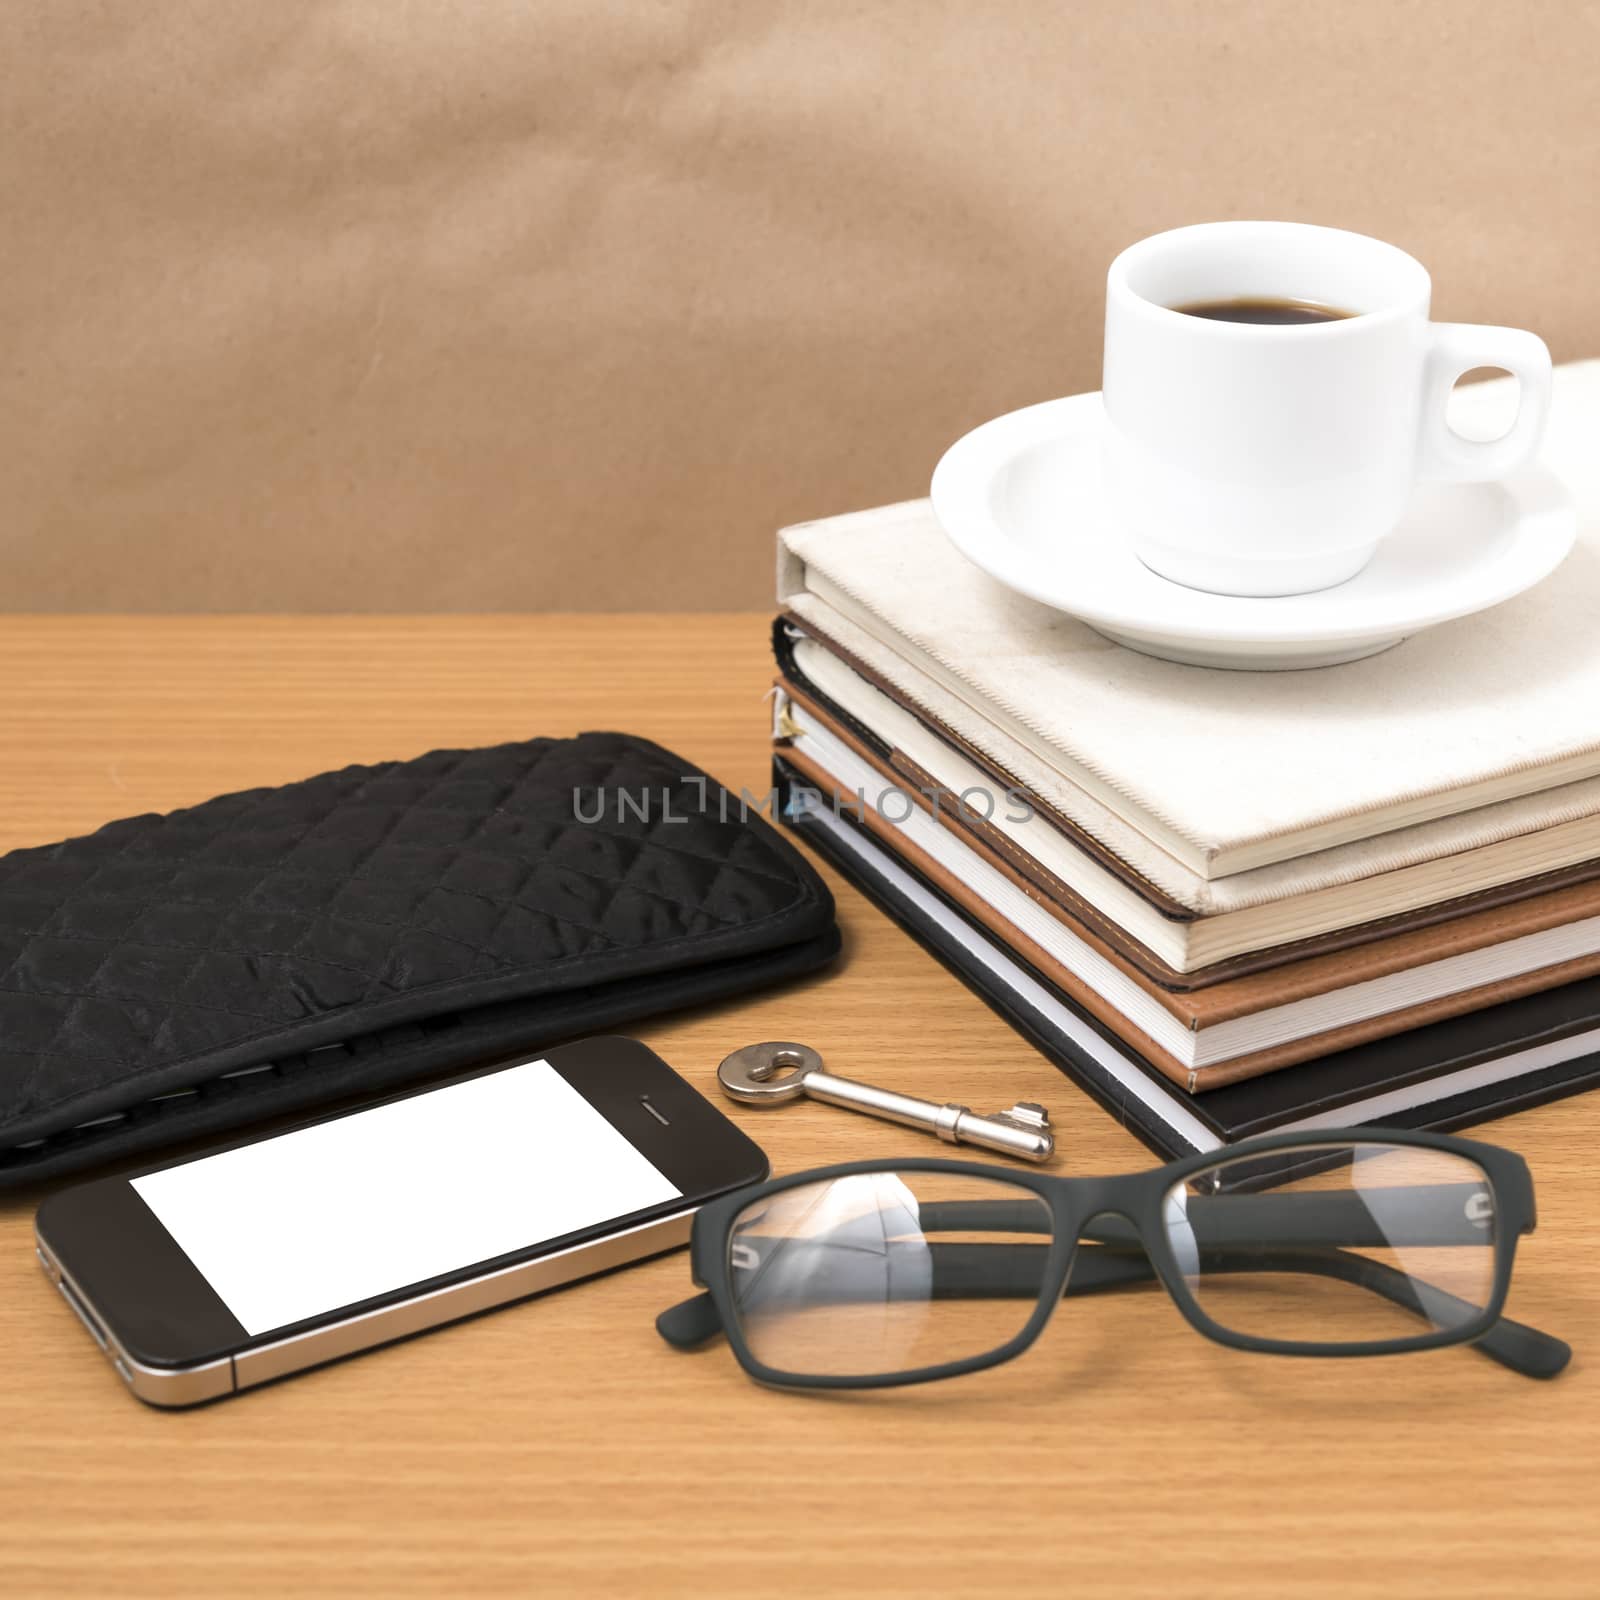 coffee and phone with stack of book,key,eyeglasses and wallet on wood background